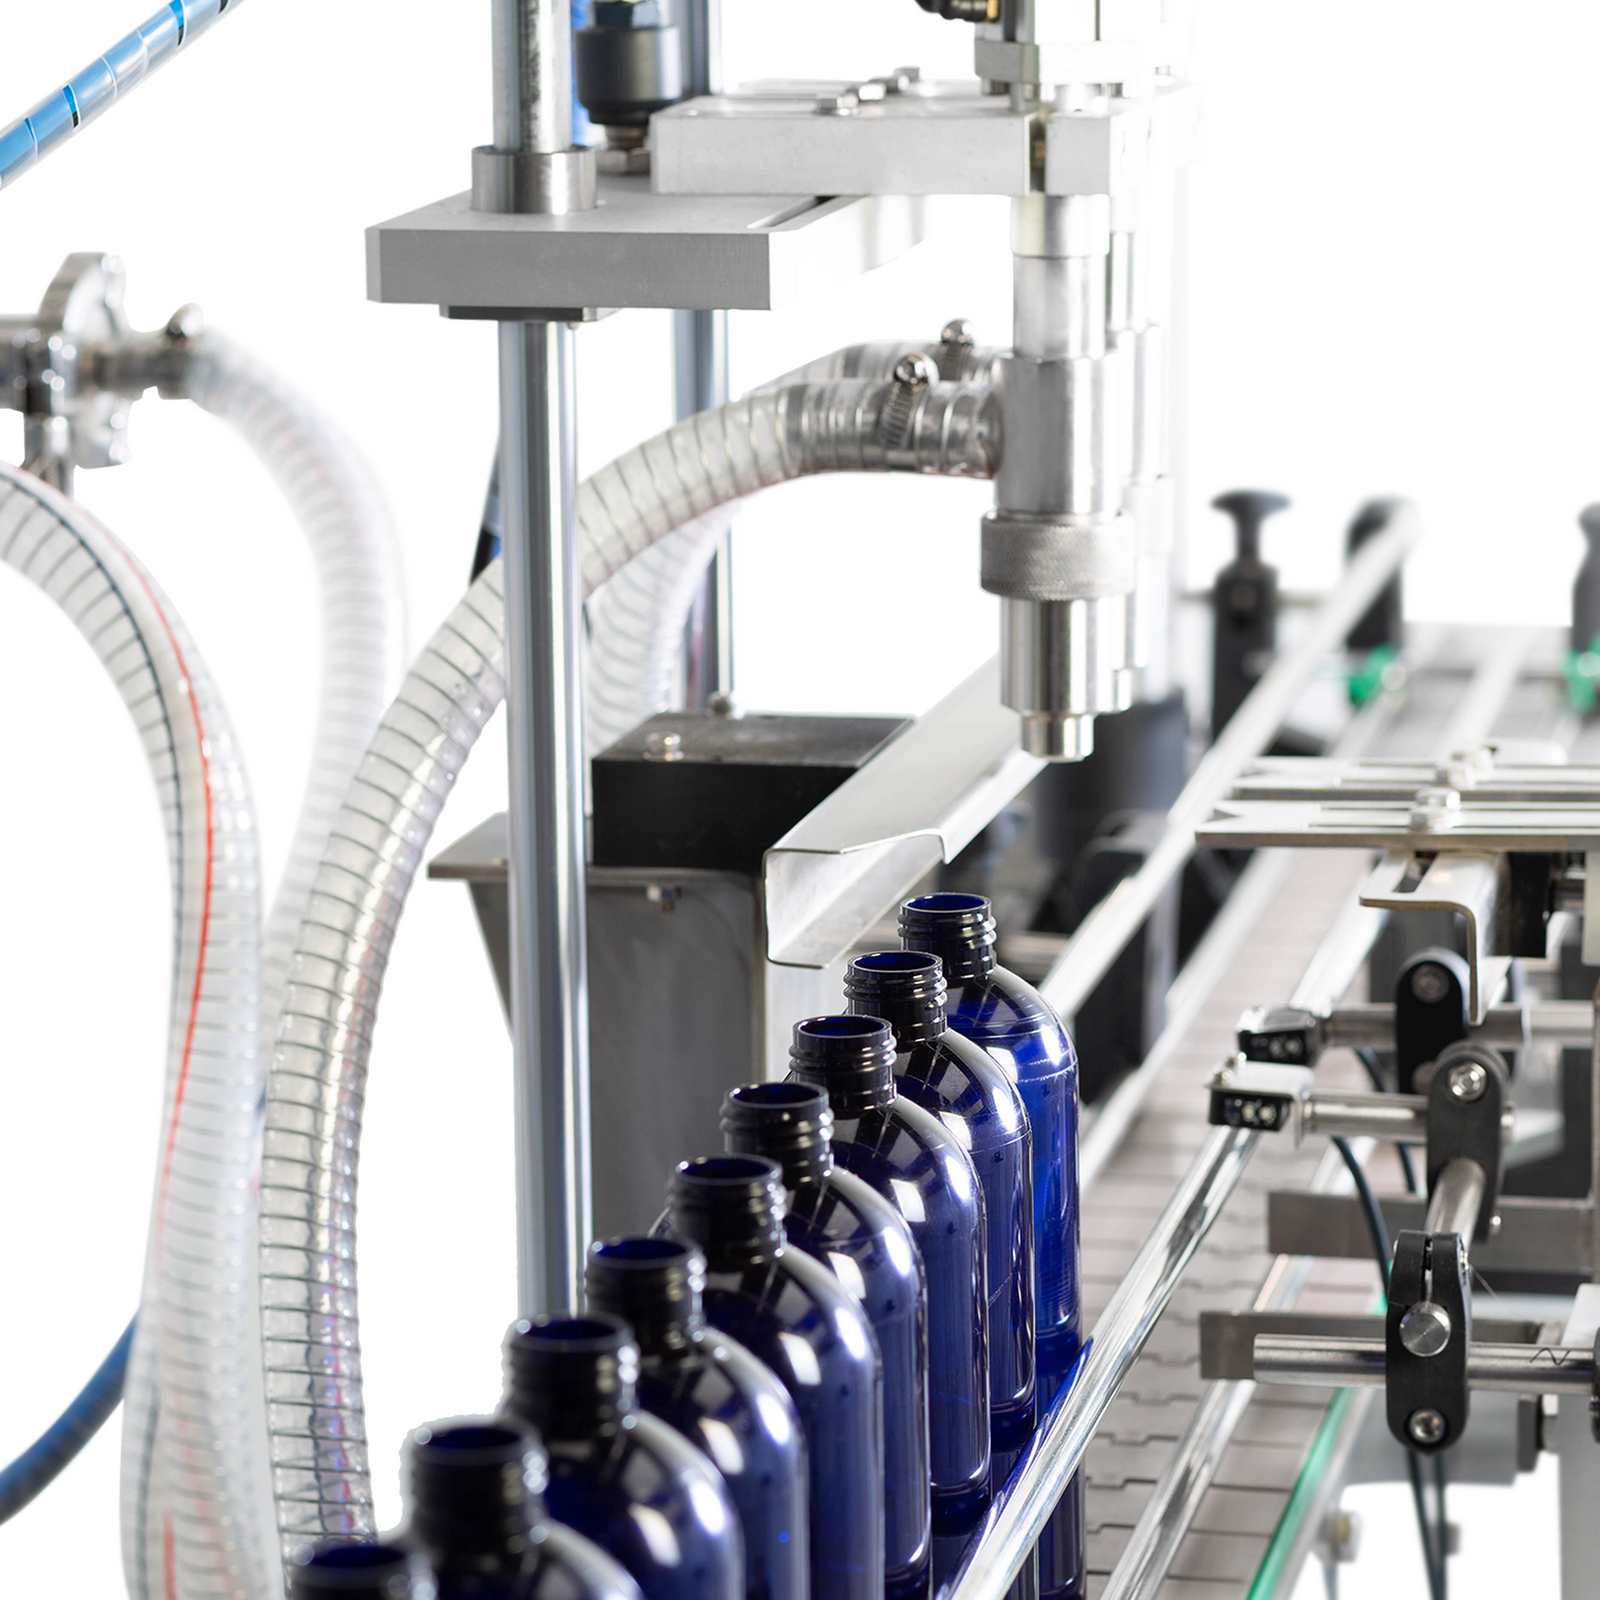 Closeup of the two heads of the paste filling system about to dispense high viscosity product into a line of 250ml blue bottles